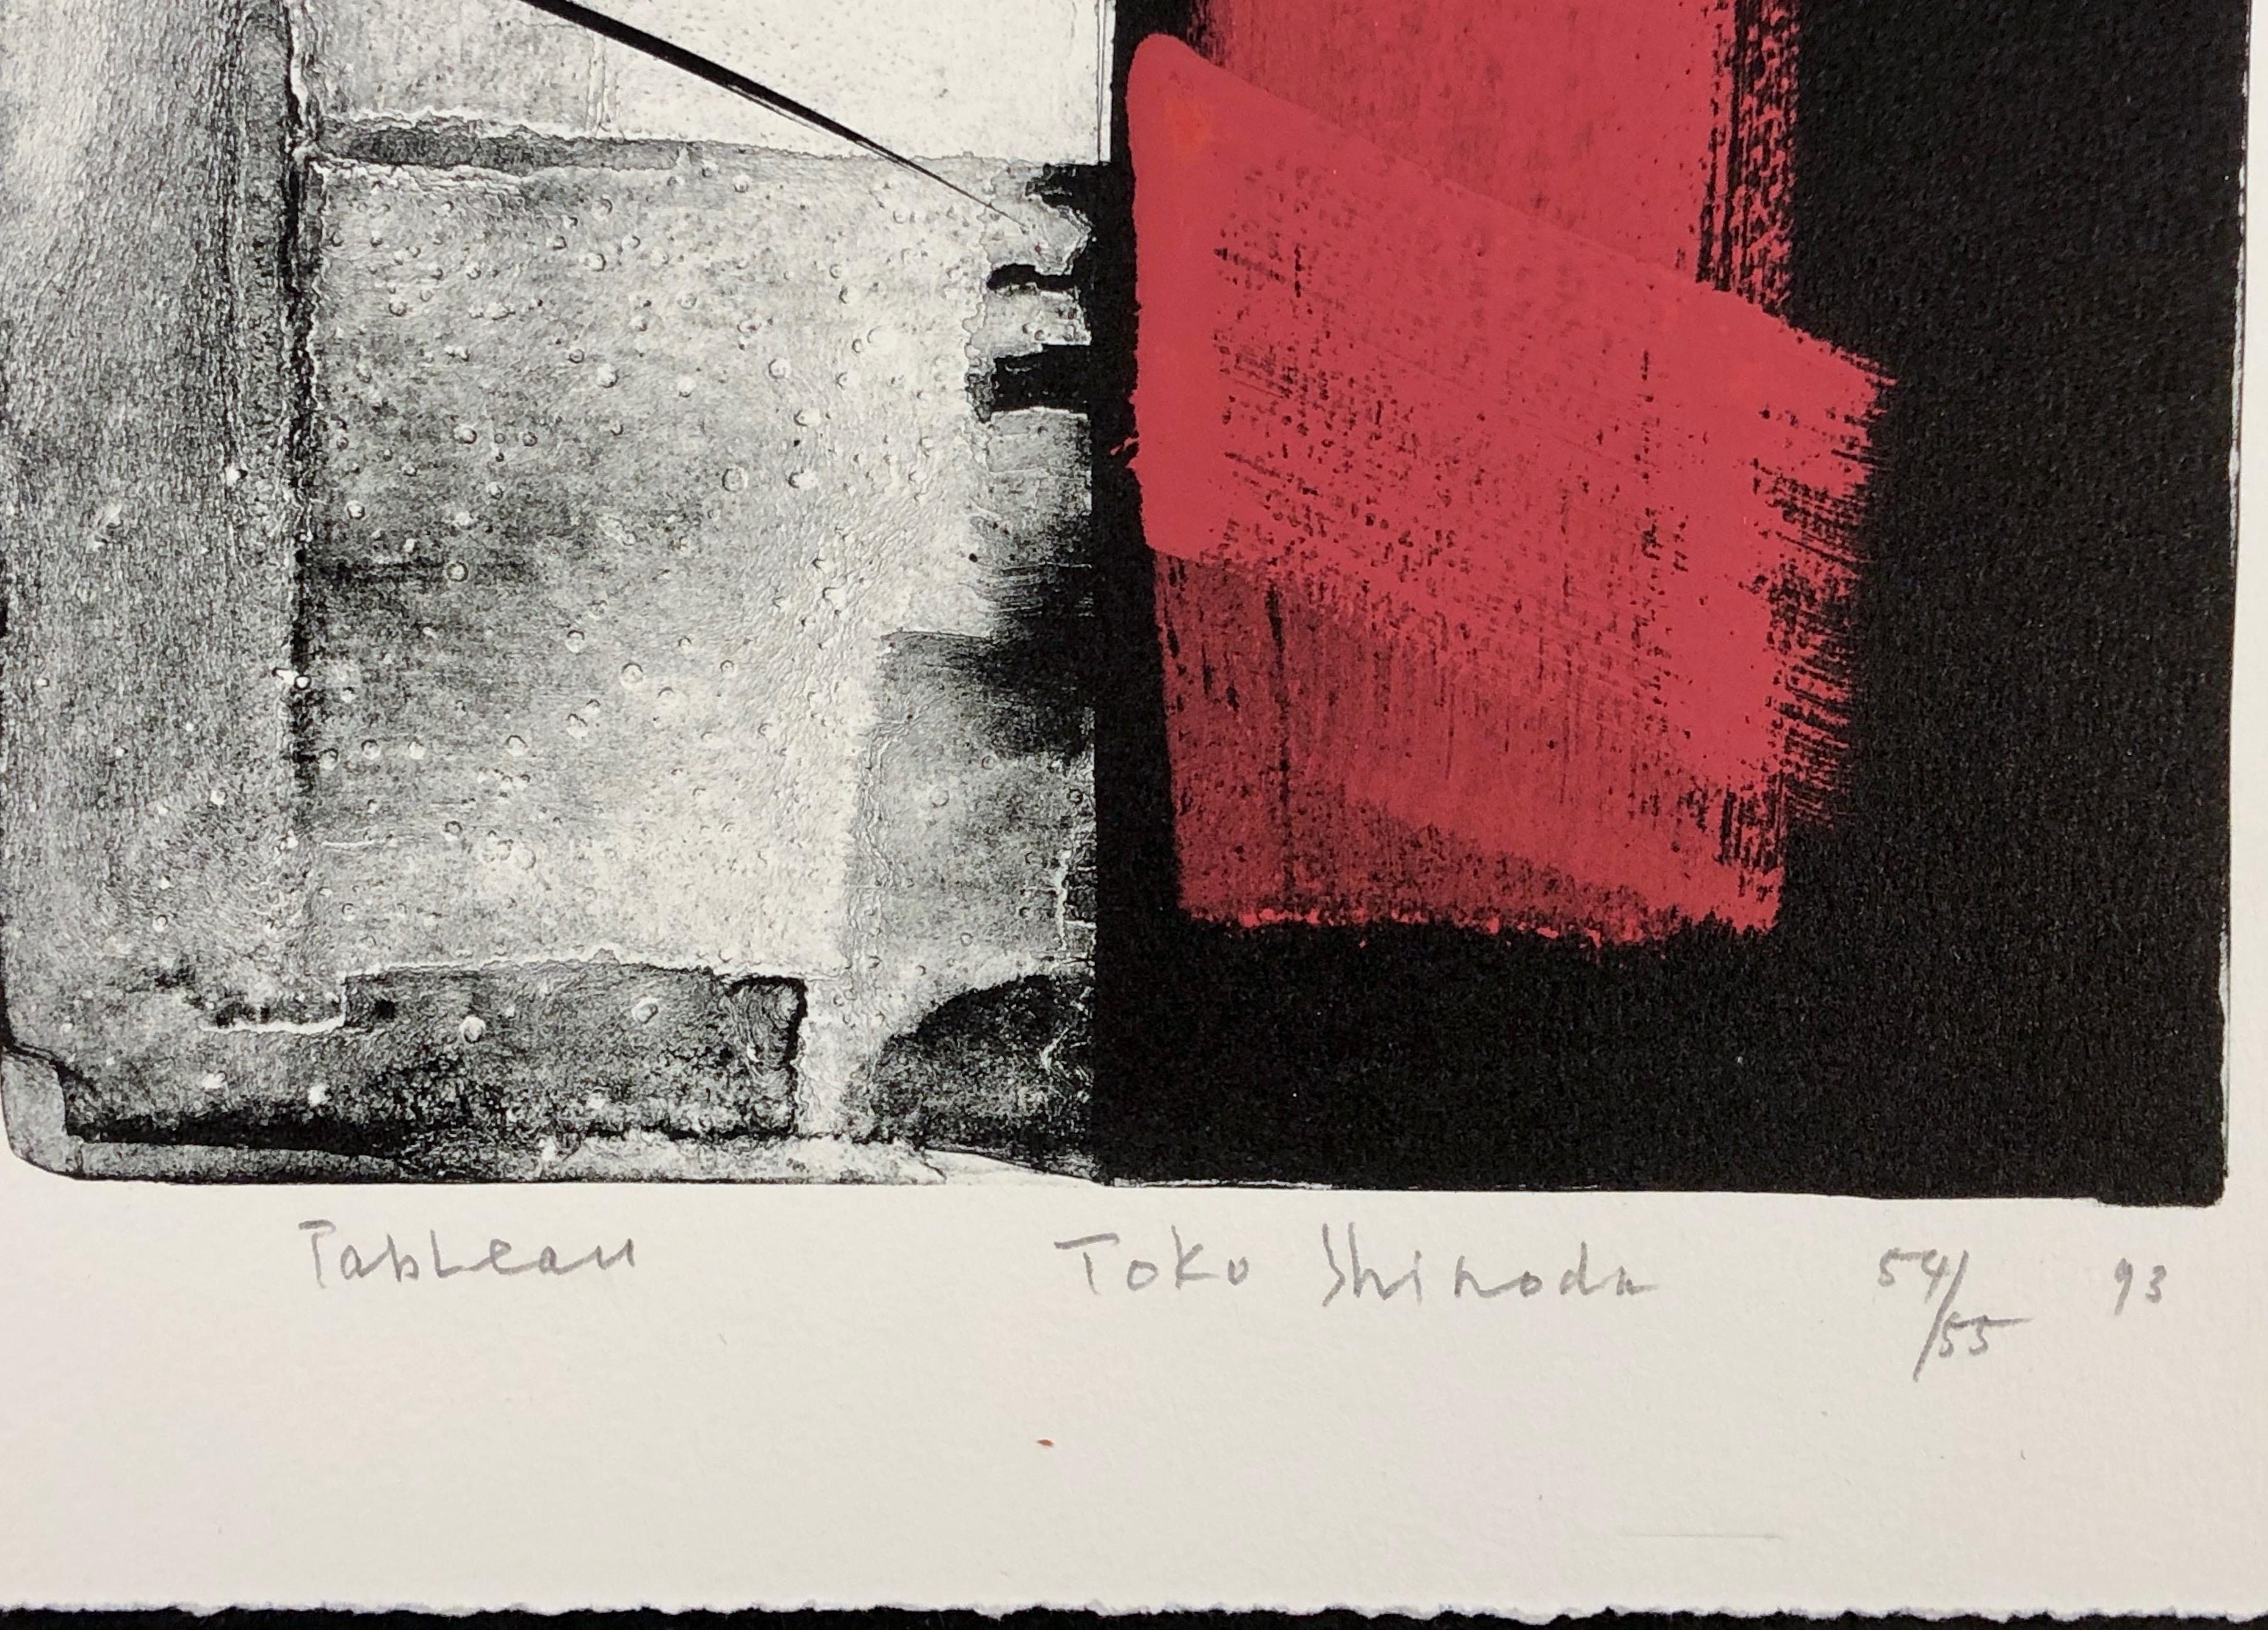 Tableau, Japanese, limited edition lithograph, black, white, red, signed, number - Print by Toko Shinoda